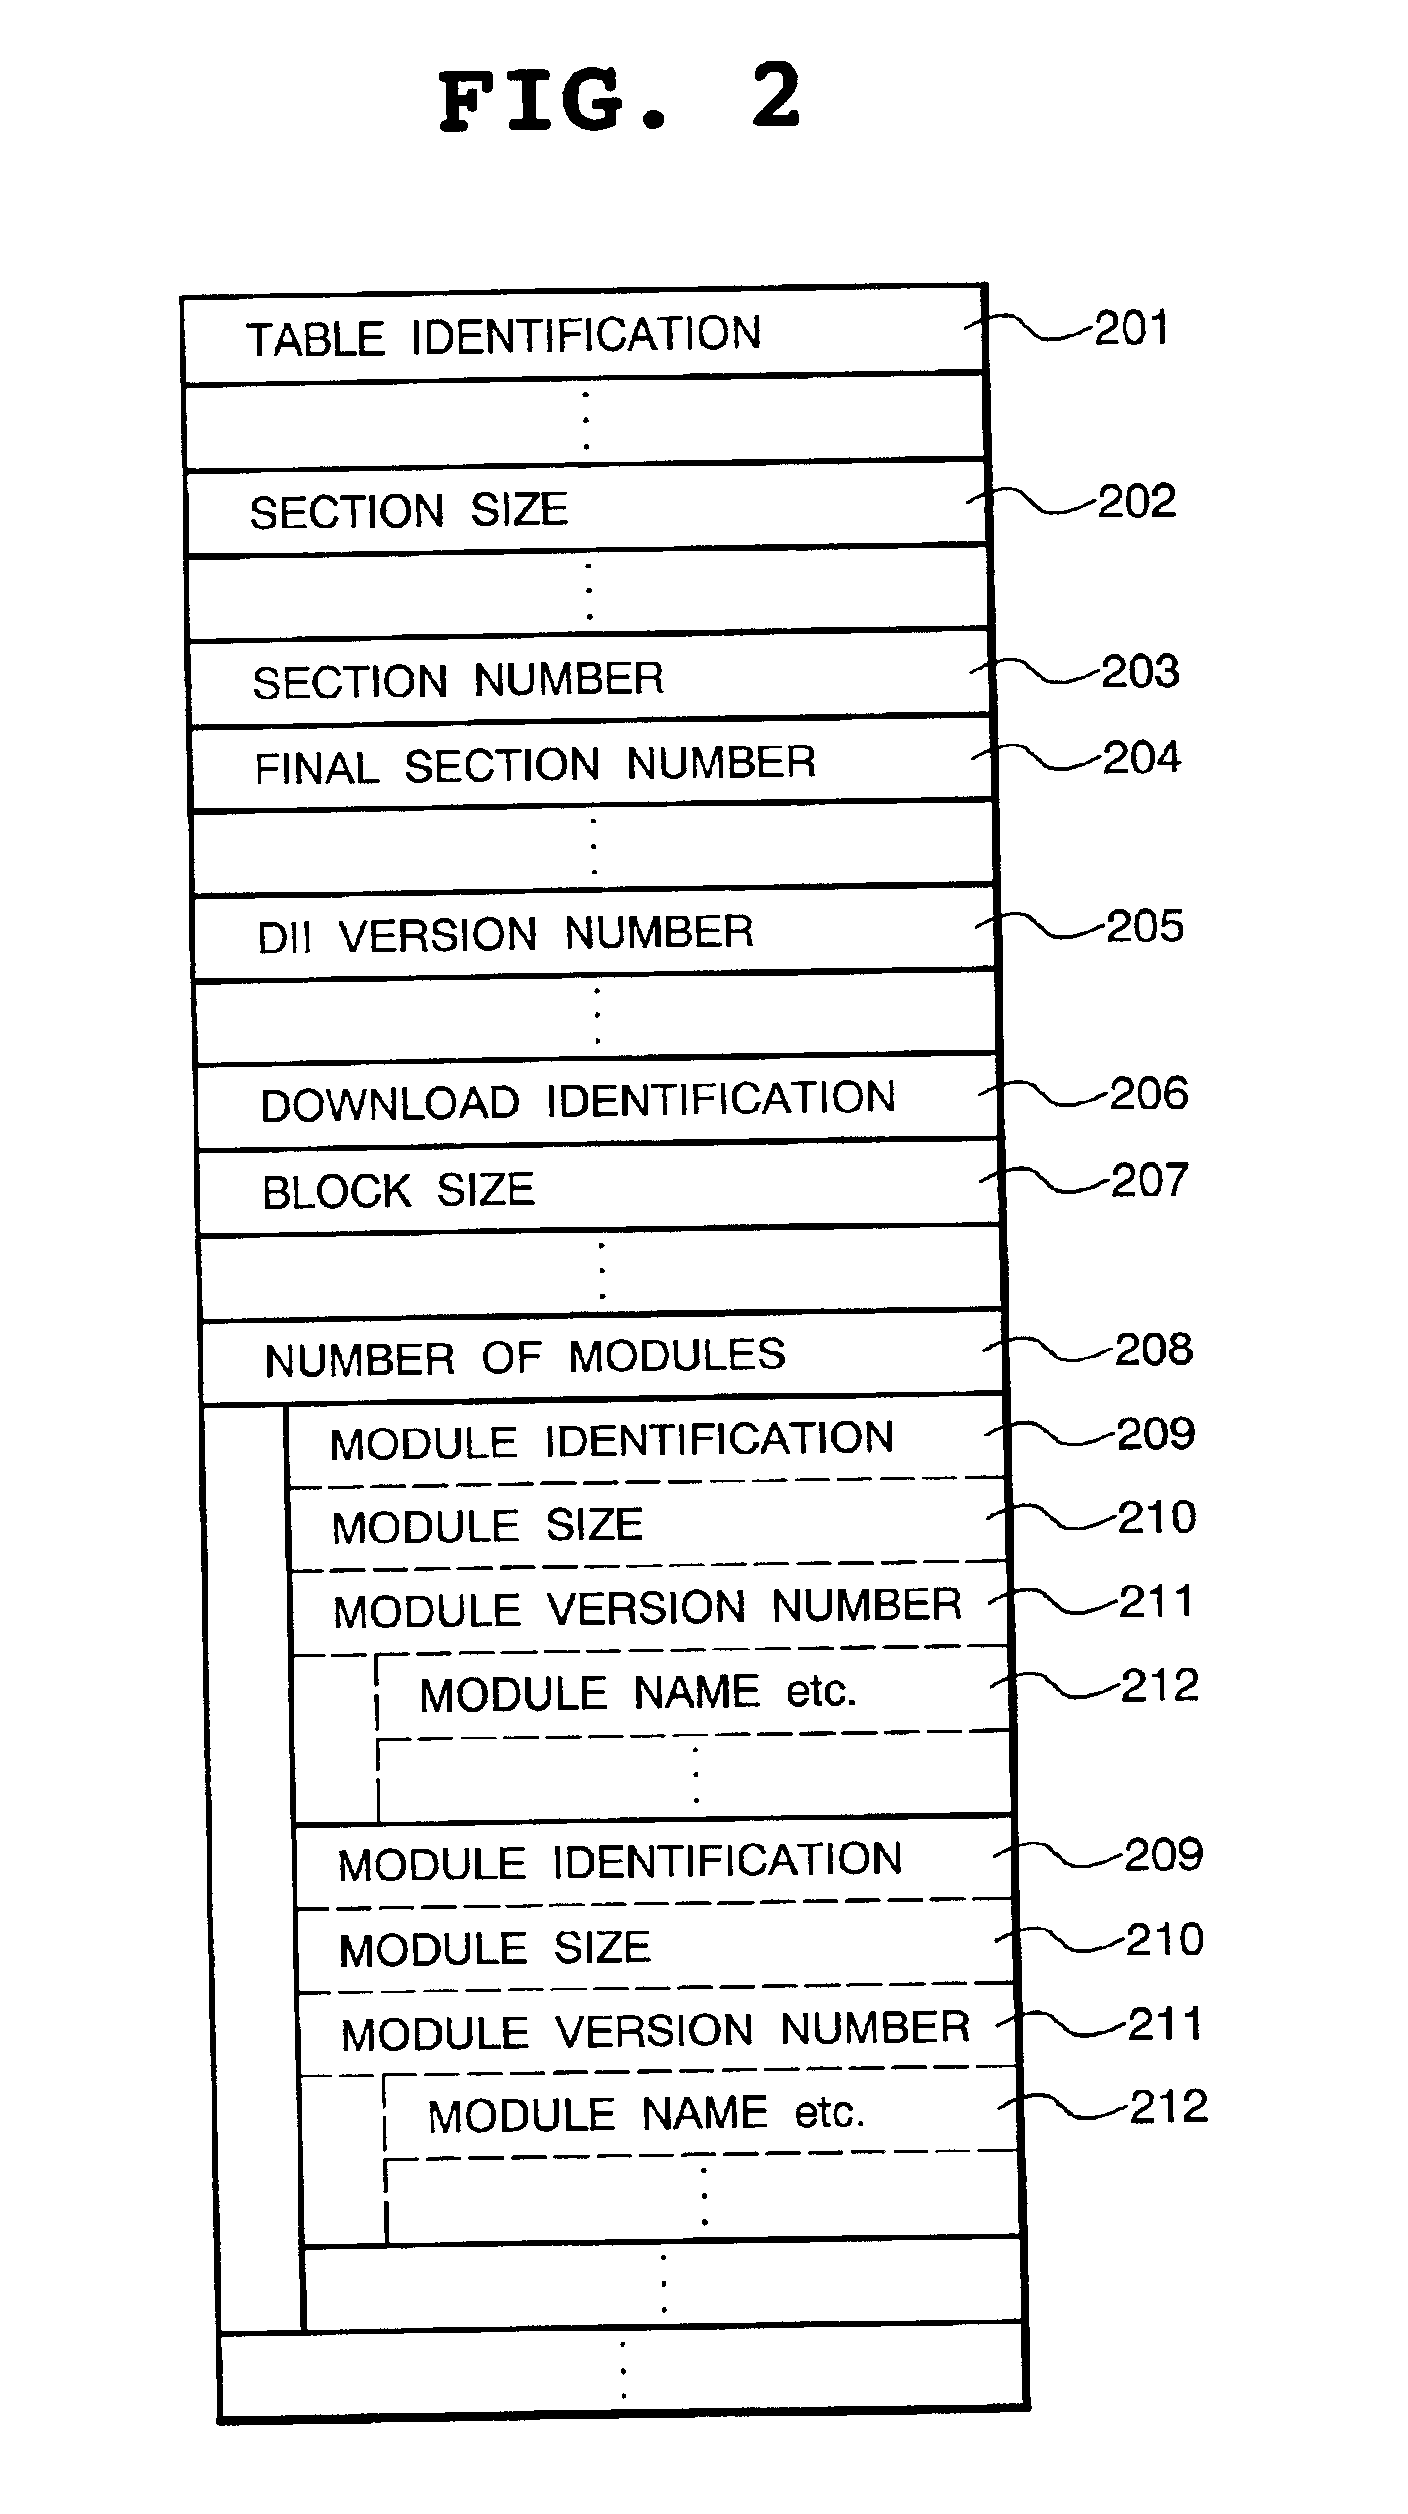 DSM-CC carousel receiver, receiving method used therefor, and recording medium storing a control program therefor